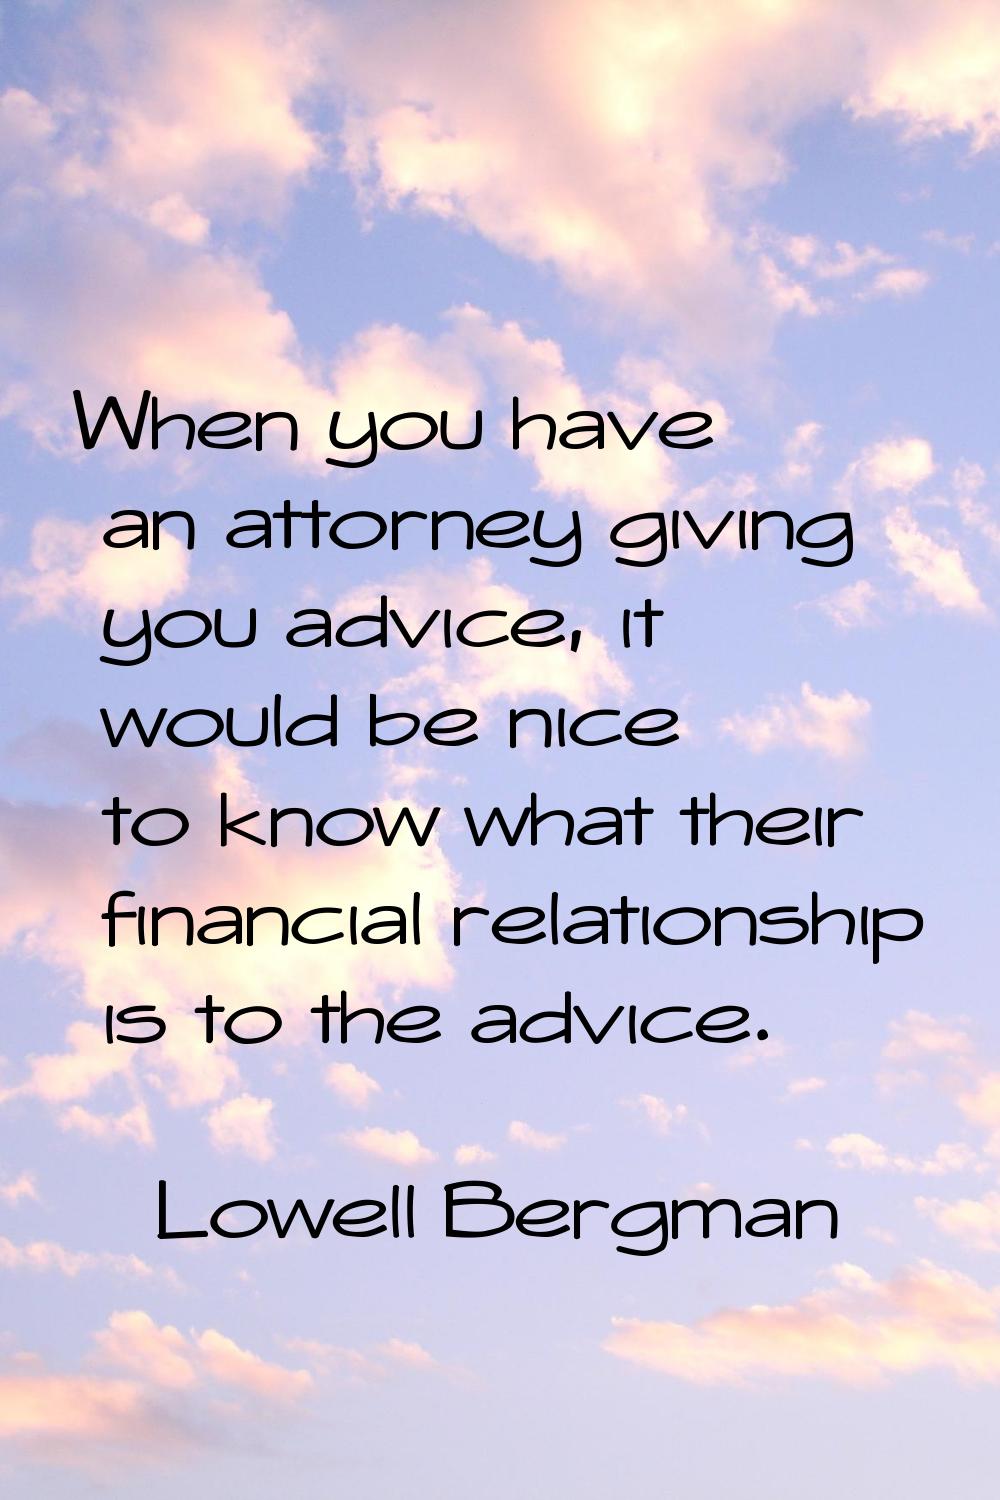 When you have an attorney giving you advice, it would be nice to know what their financial relation